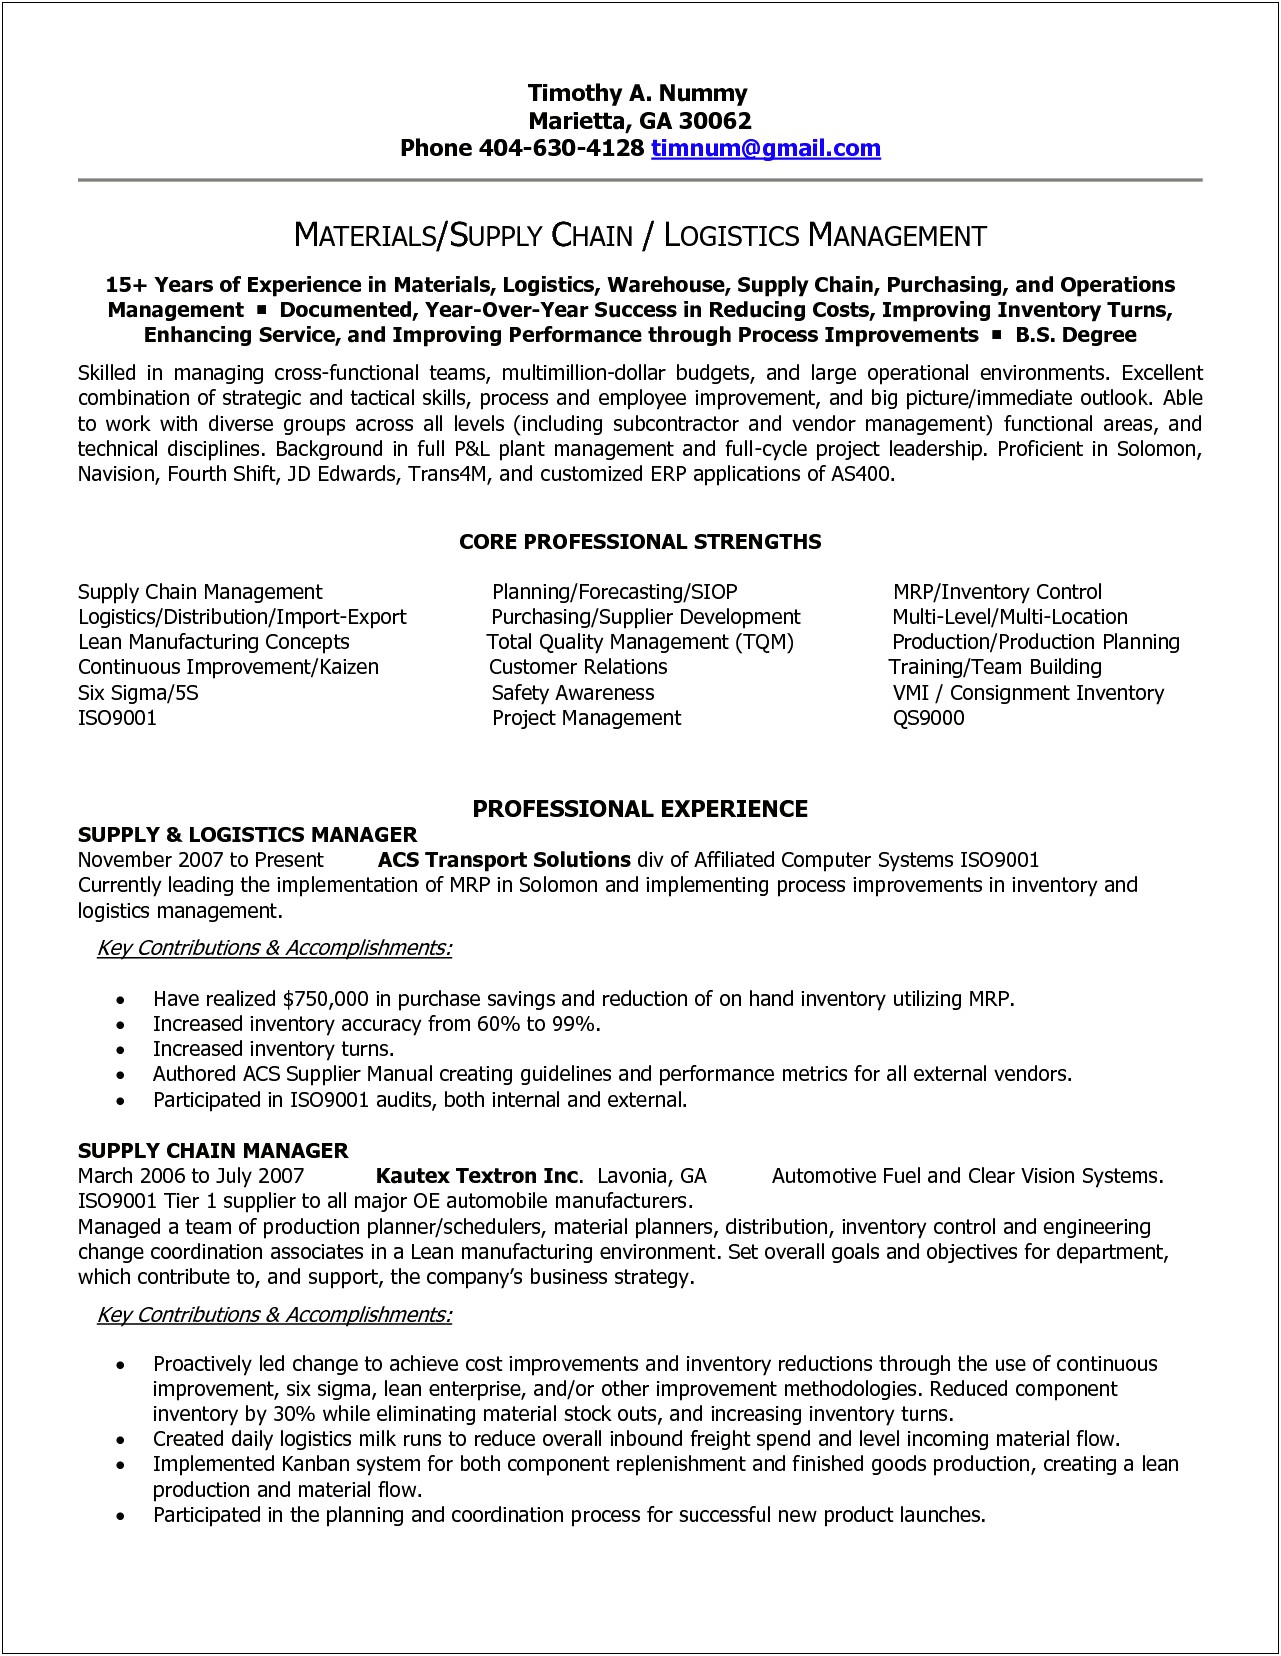 Logistics And Supply Chain Management Sample Resumes